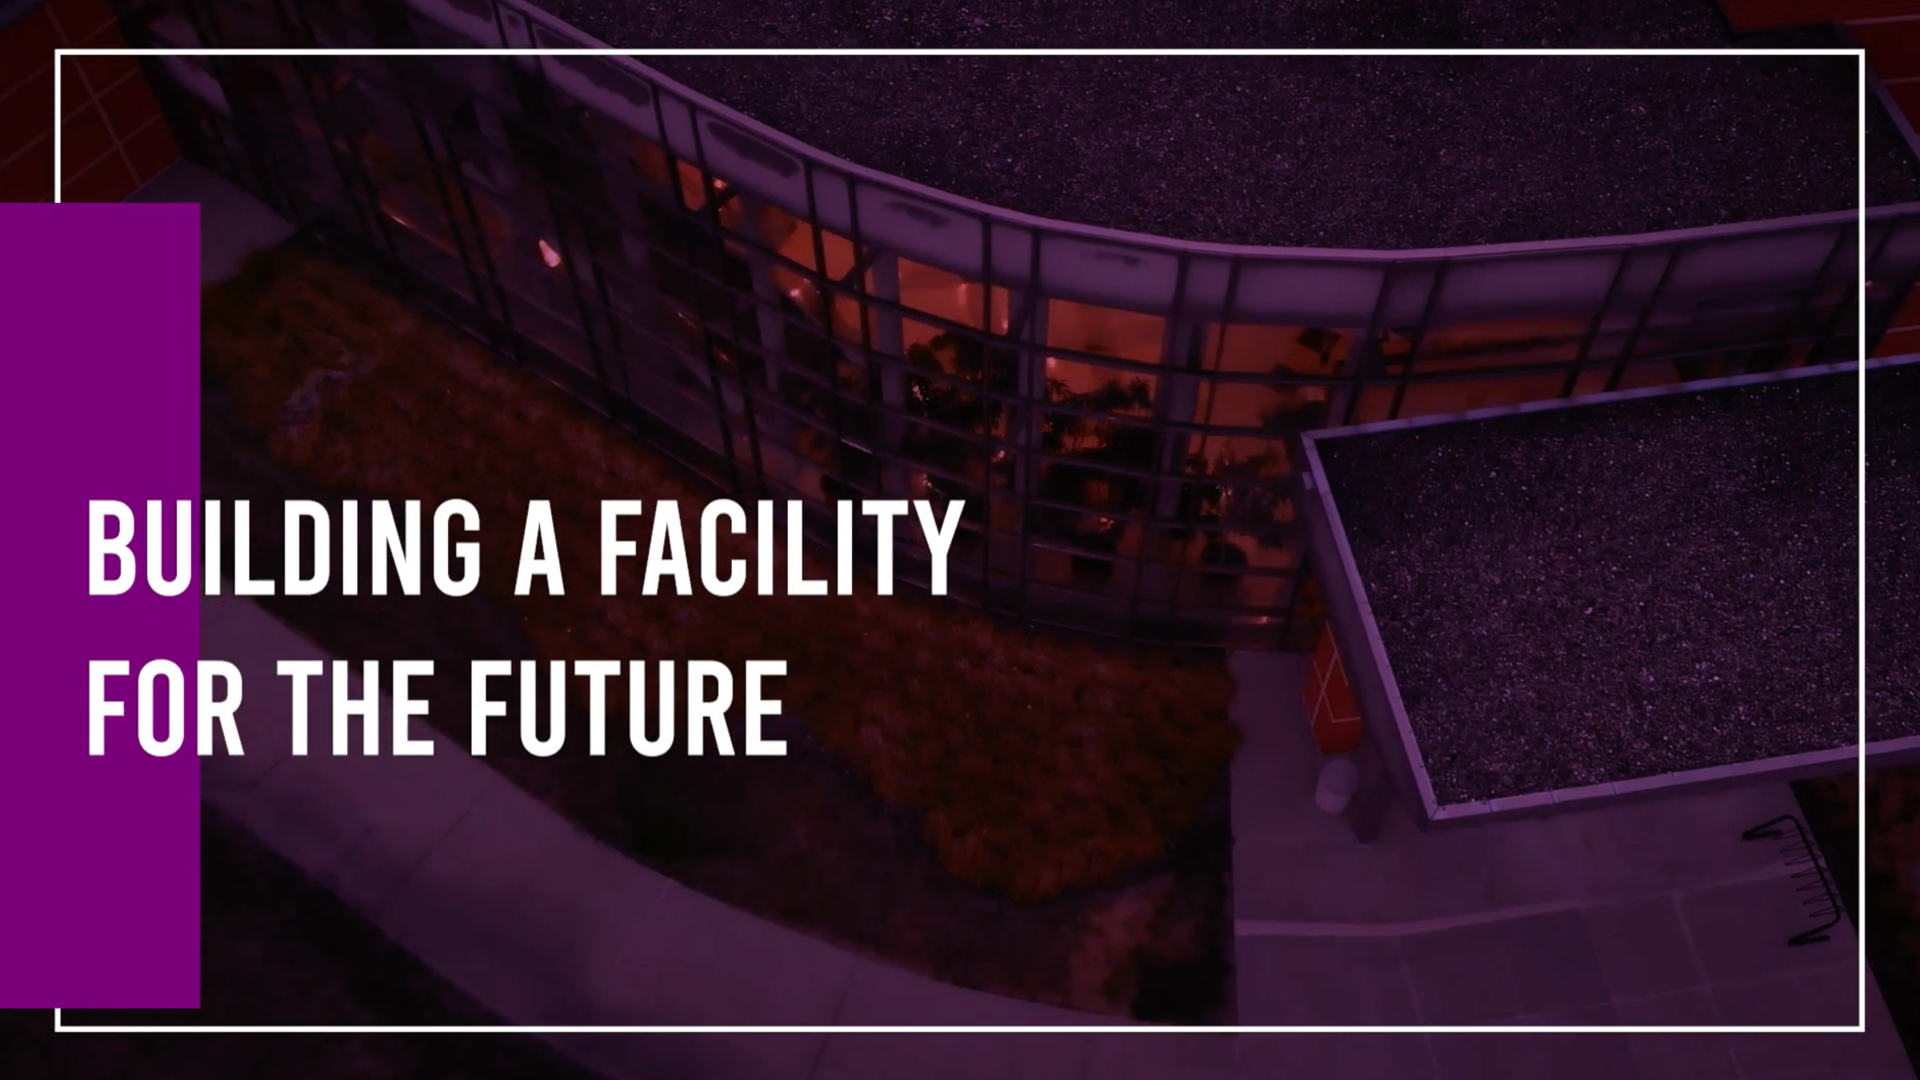 Building a facility for the future